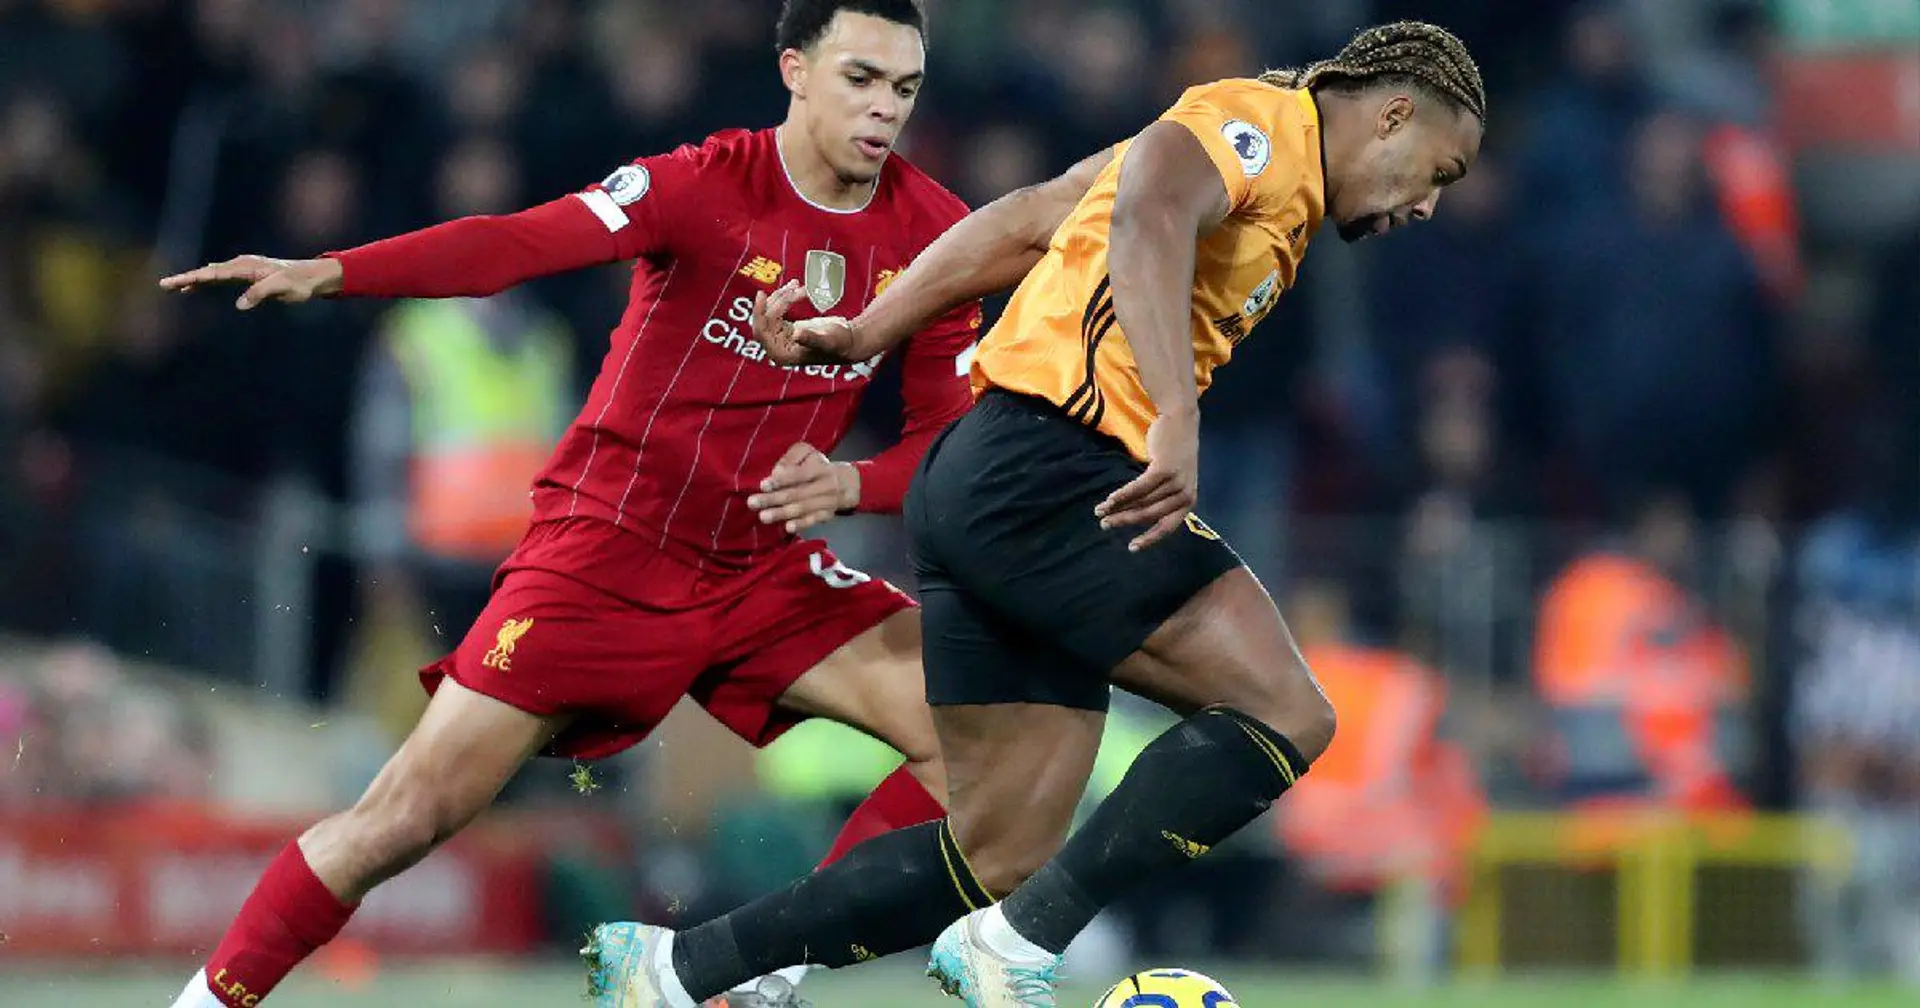 'Just be yourselves': Trent's brilliant advice to Liverpool youngsters on how to get better